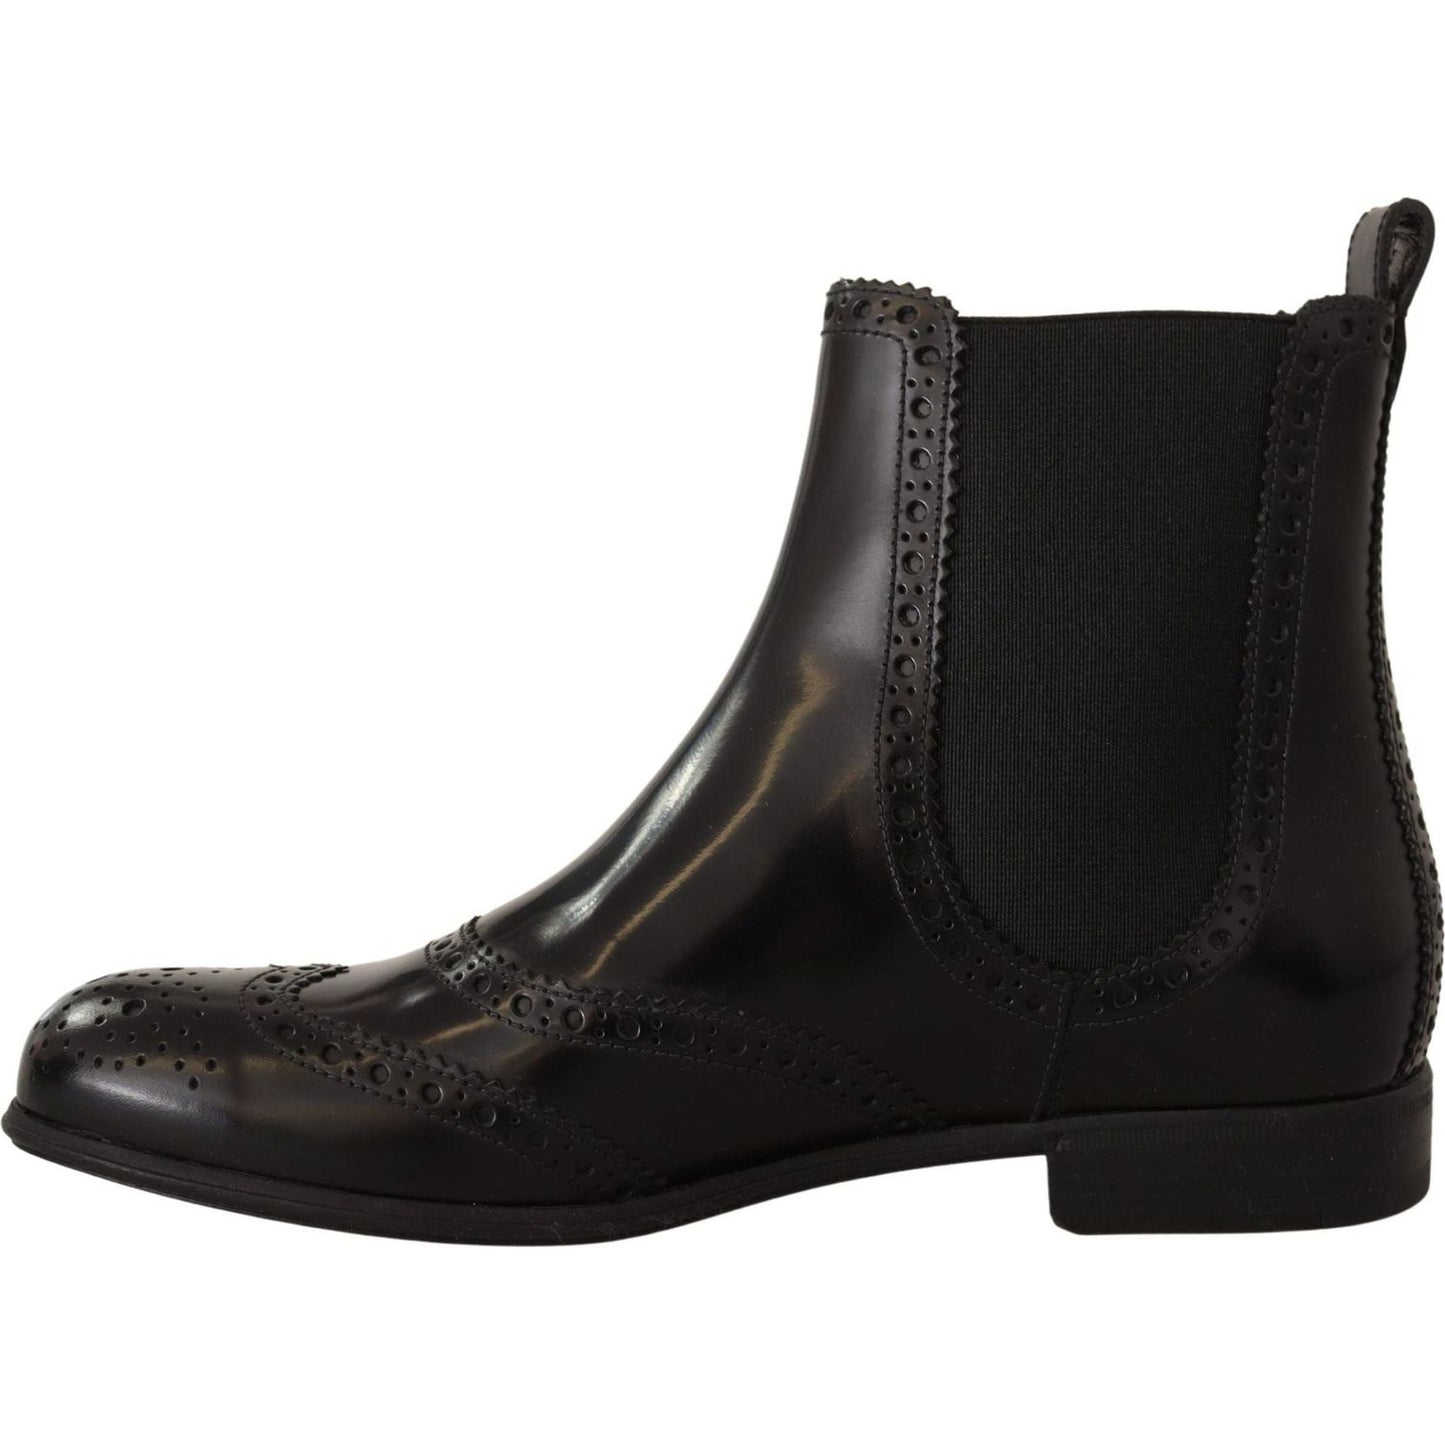 Dolce & Gabbana Elegant Black Ankle Wingtip Oxford Boots black-leather-ankle-high-flat-boots-shoes